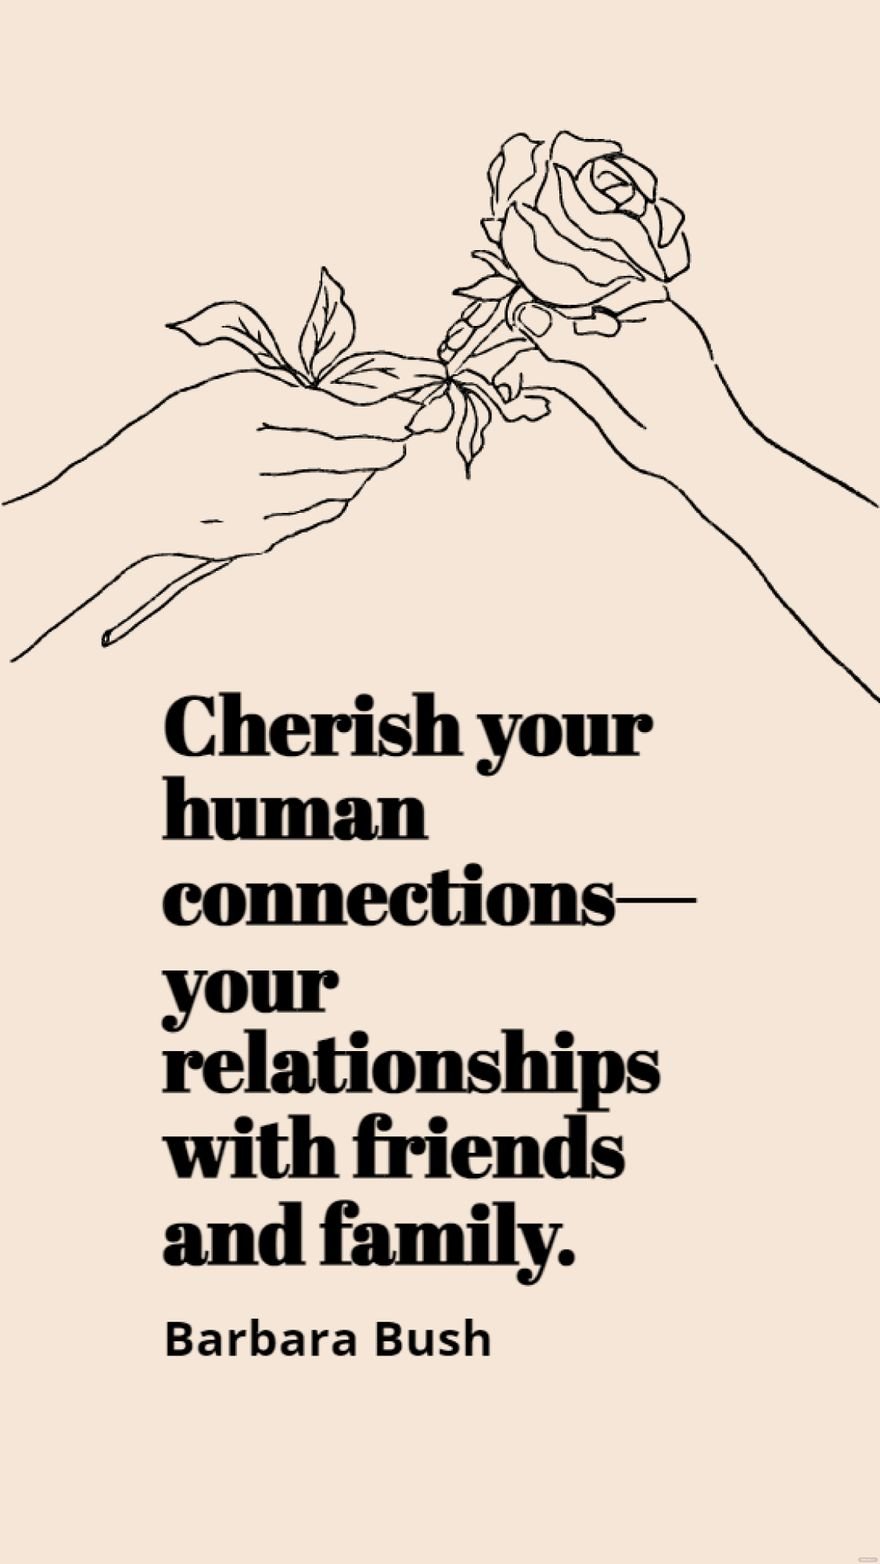 Barbara Bush - Cherish your human connections - your relationships with friends and family.